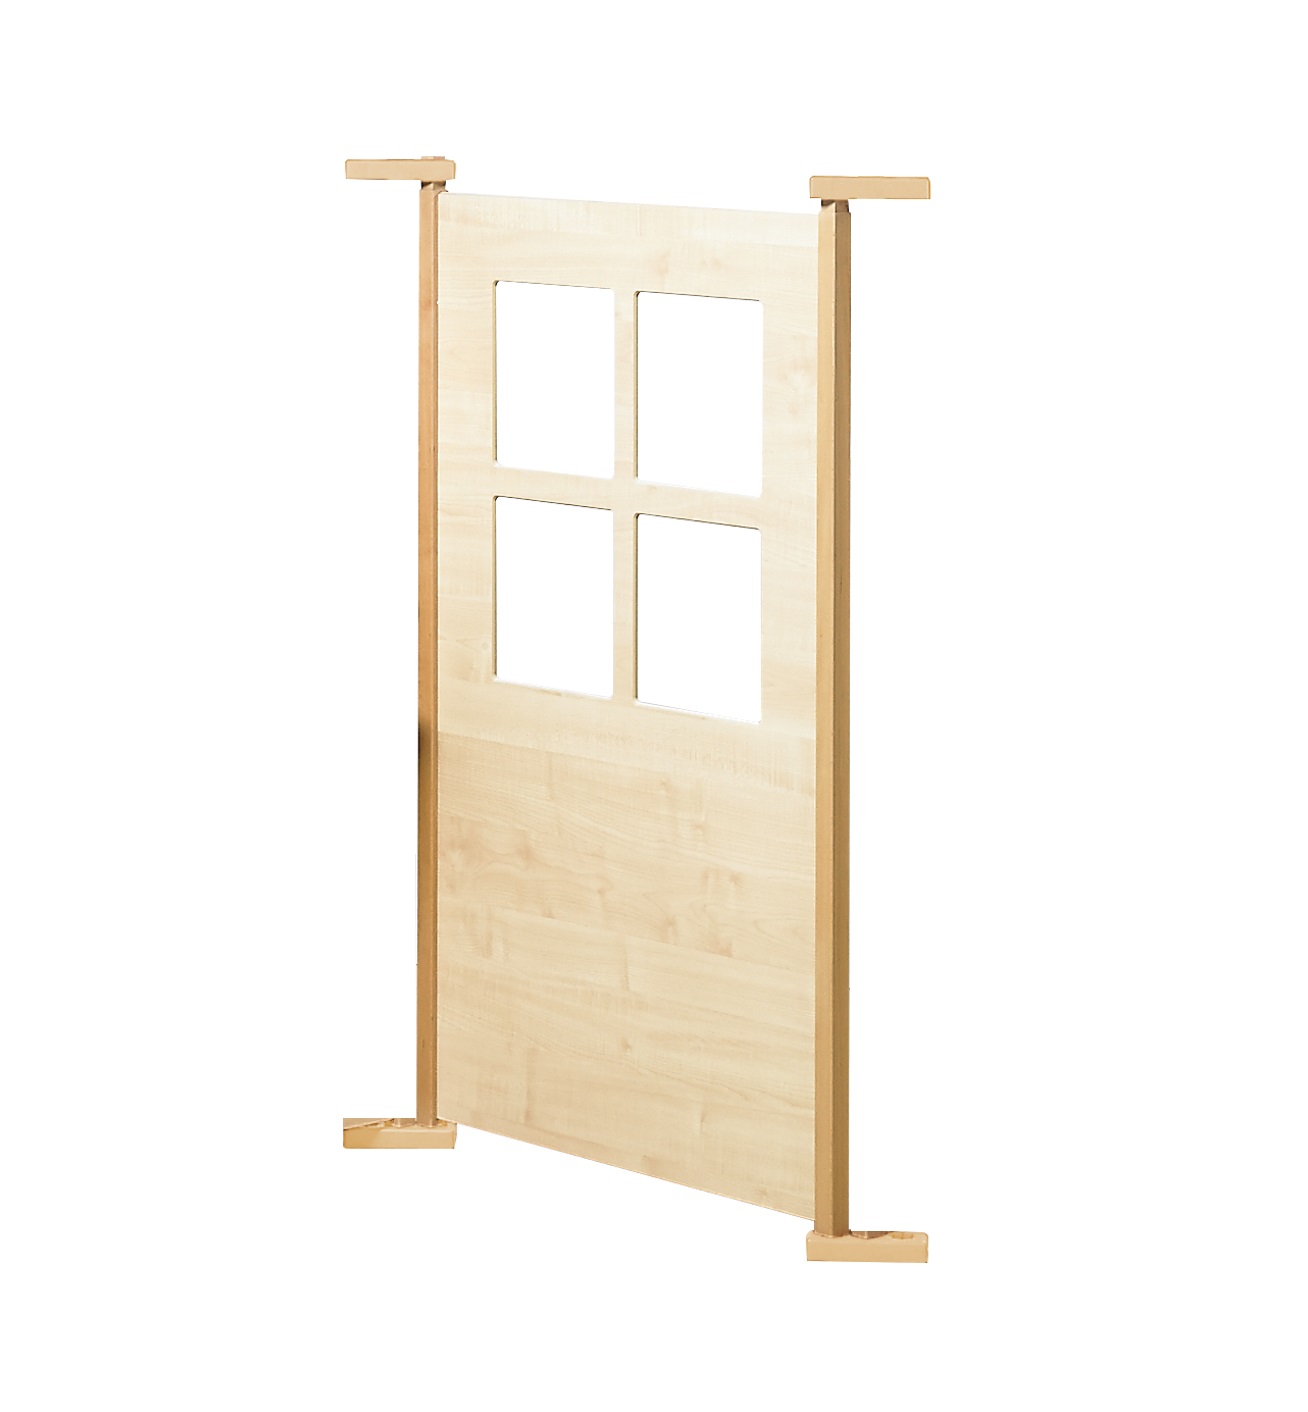 Maple Effect Play Panel Square Window